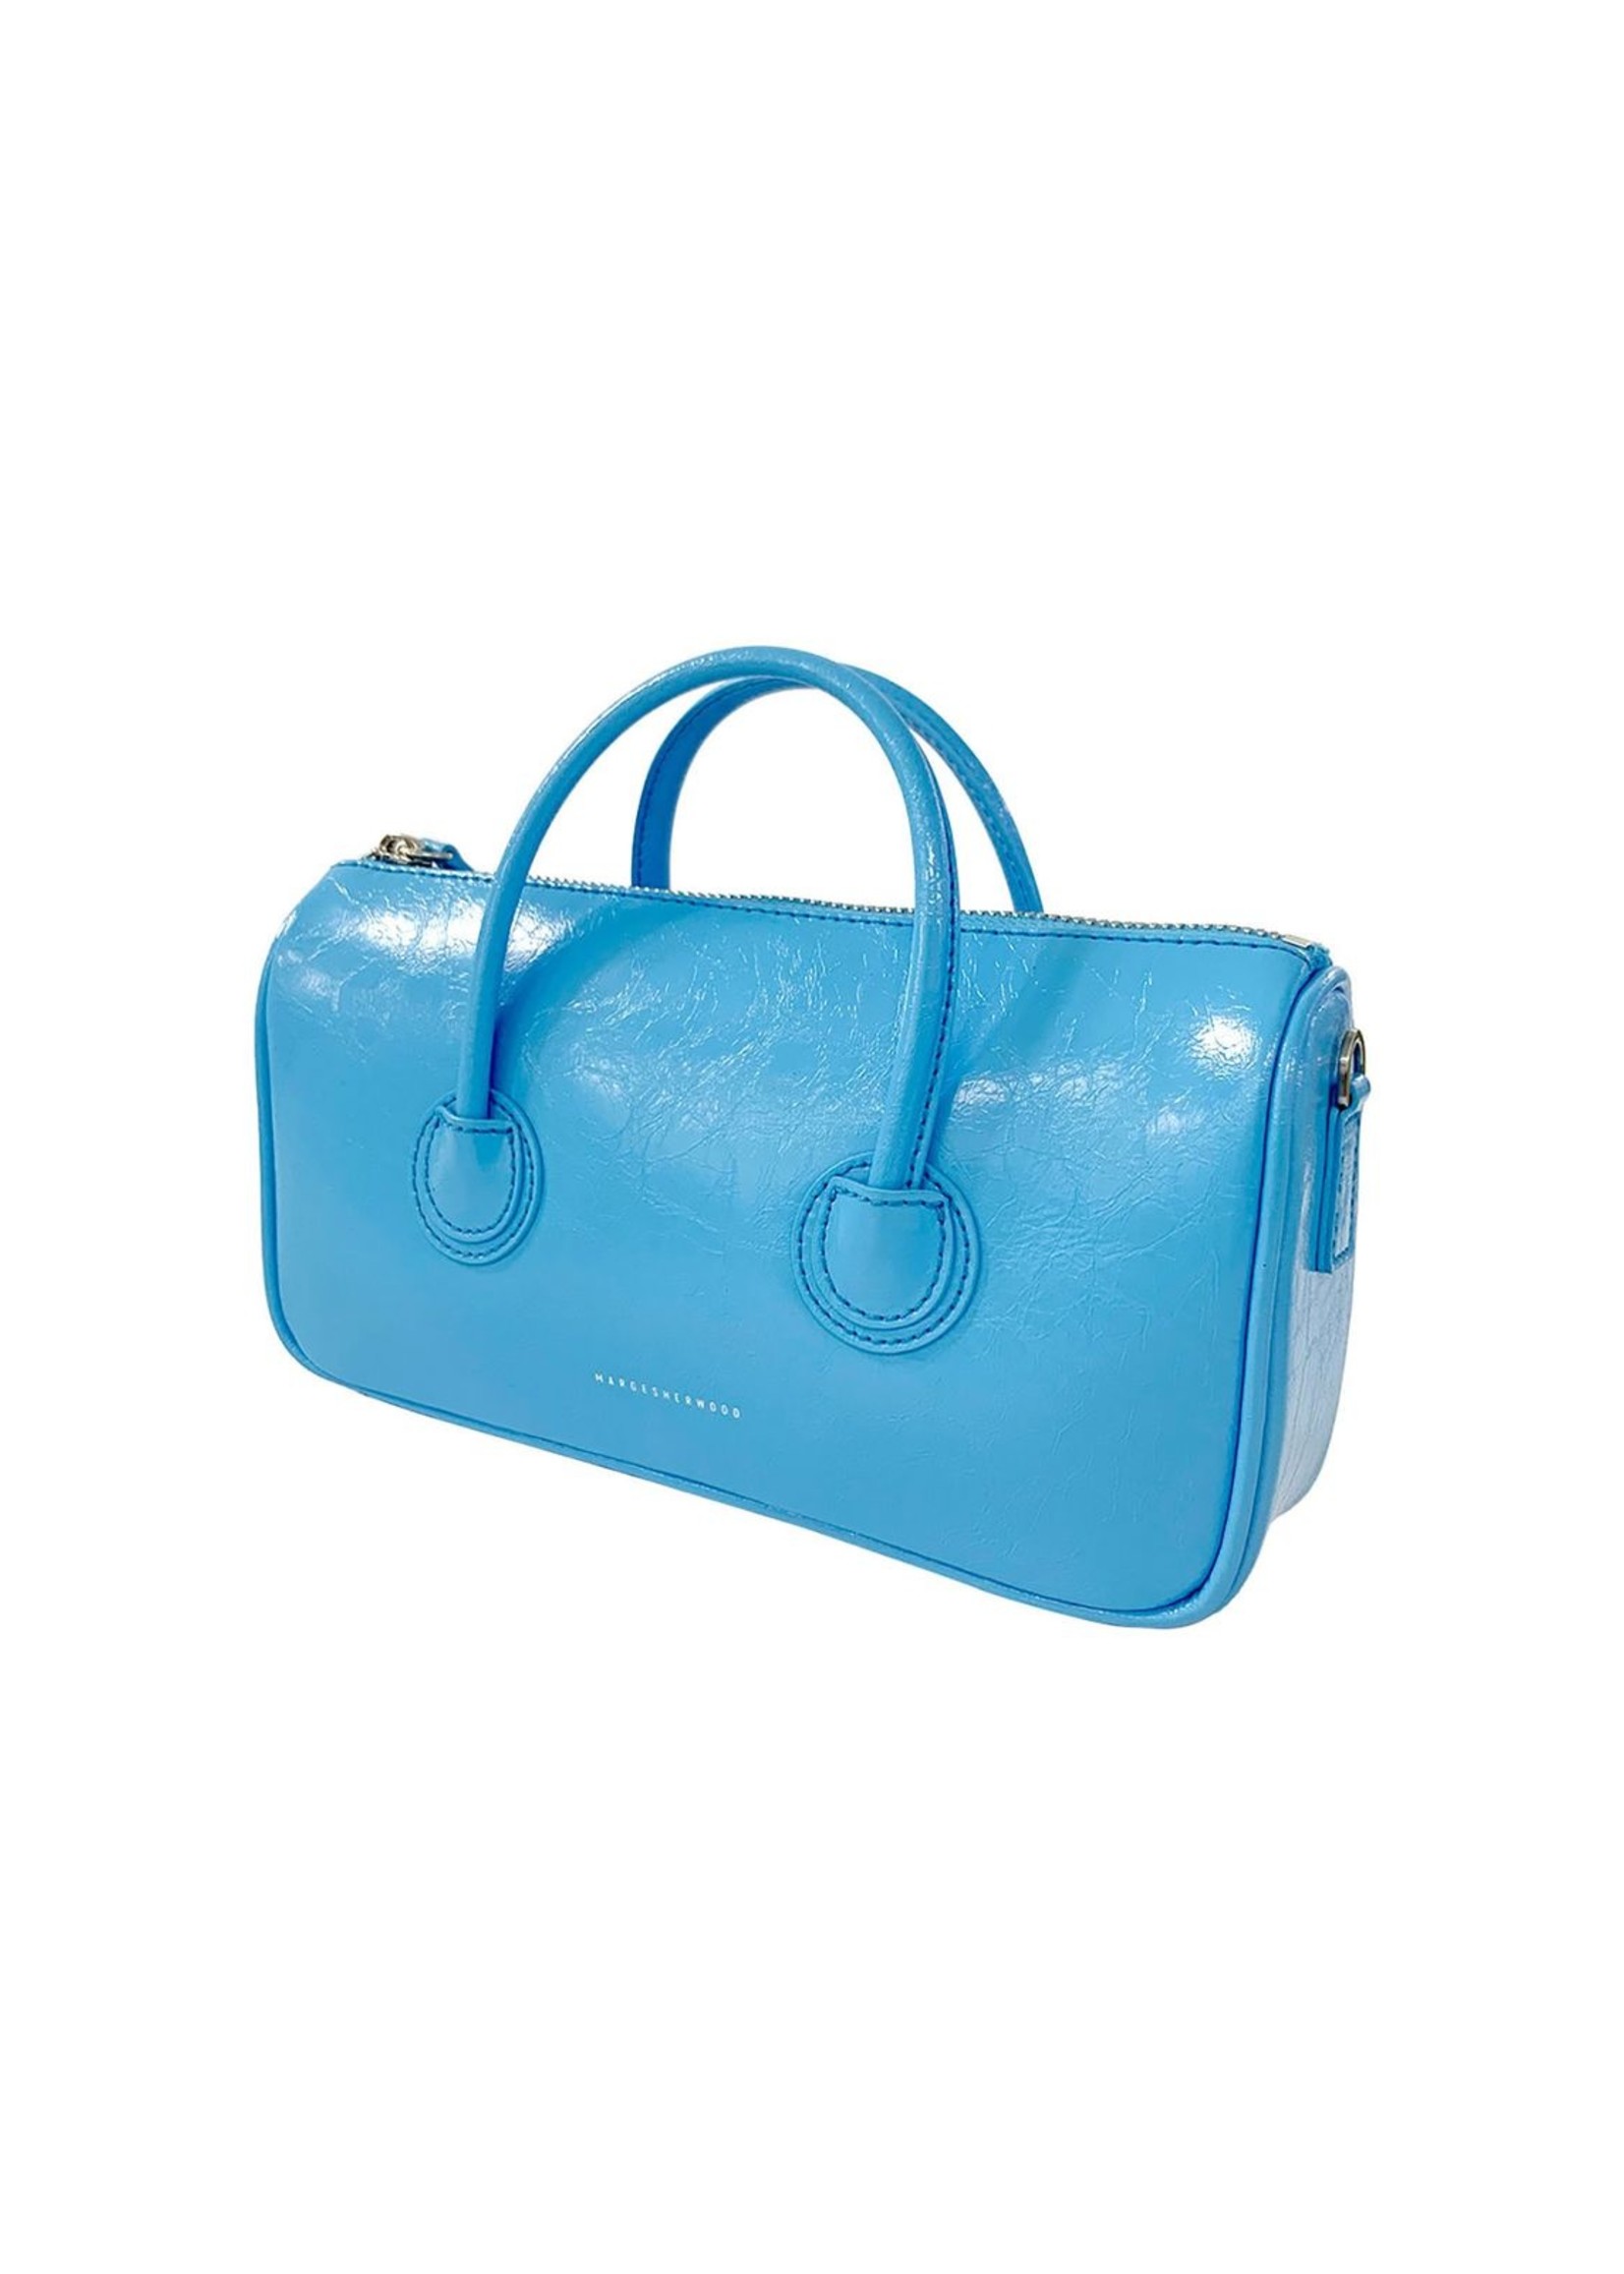 MARGE SHERWOOD Zipper Small Bag in Neon Blue Crinkled Leather